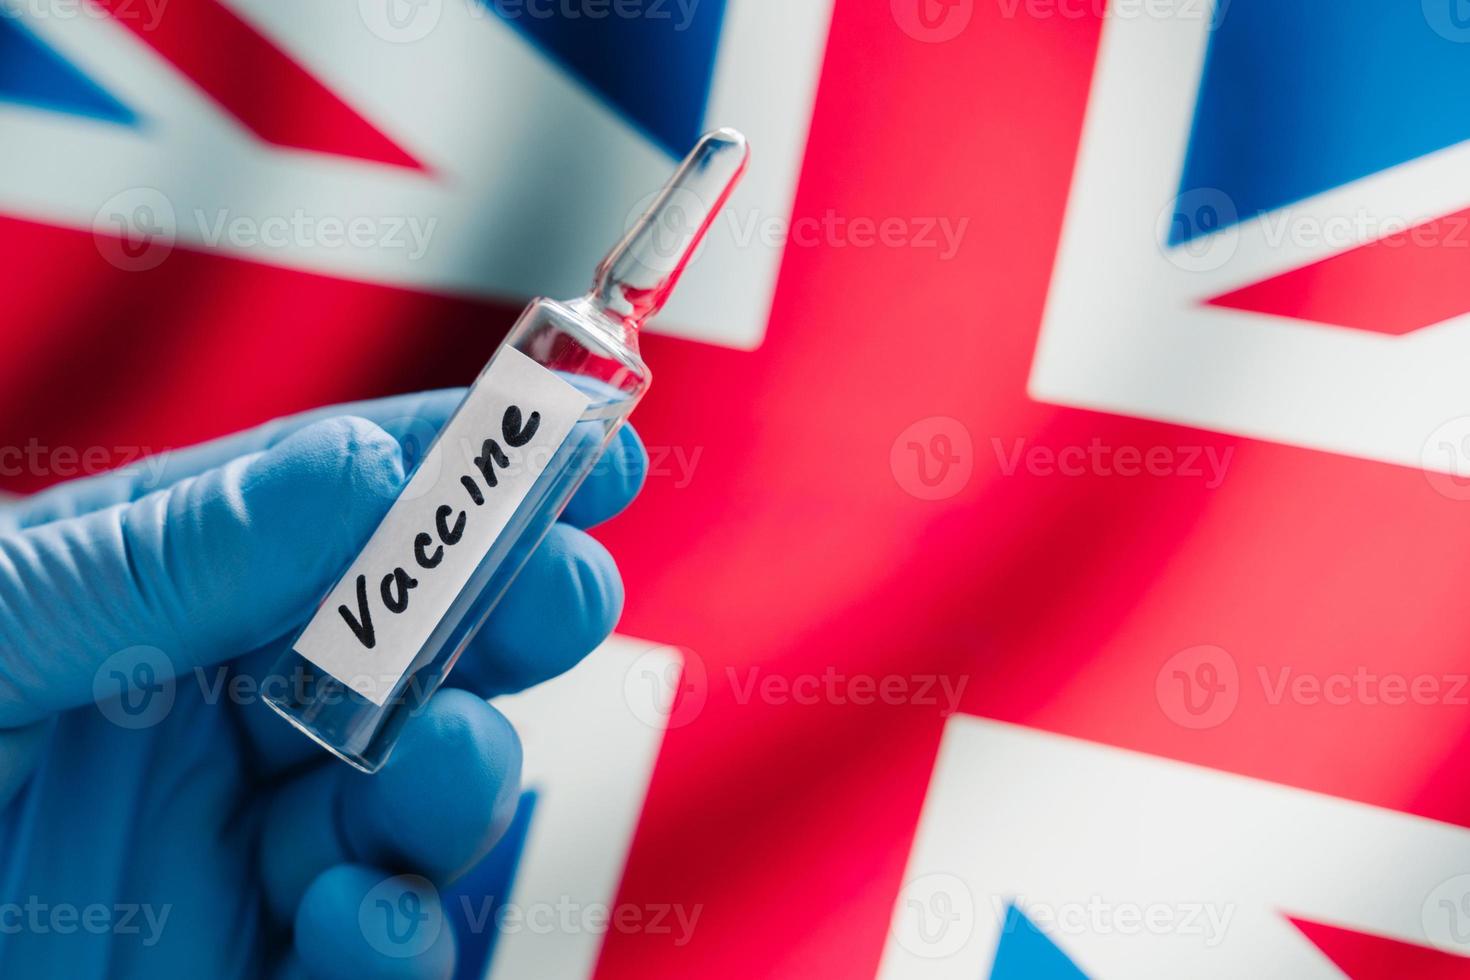 New coronavirus vaccine against UK flag as background. Fight against Covid-19. British medical research and vaccination. Medicine concept photo